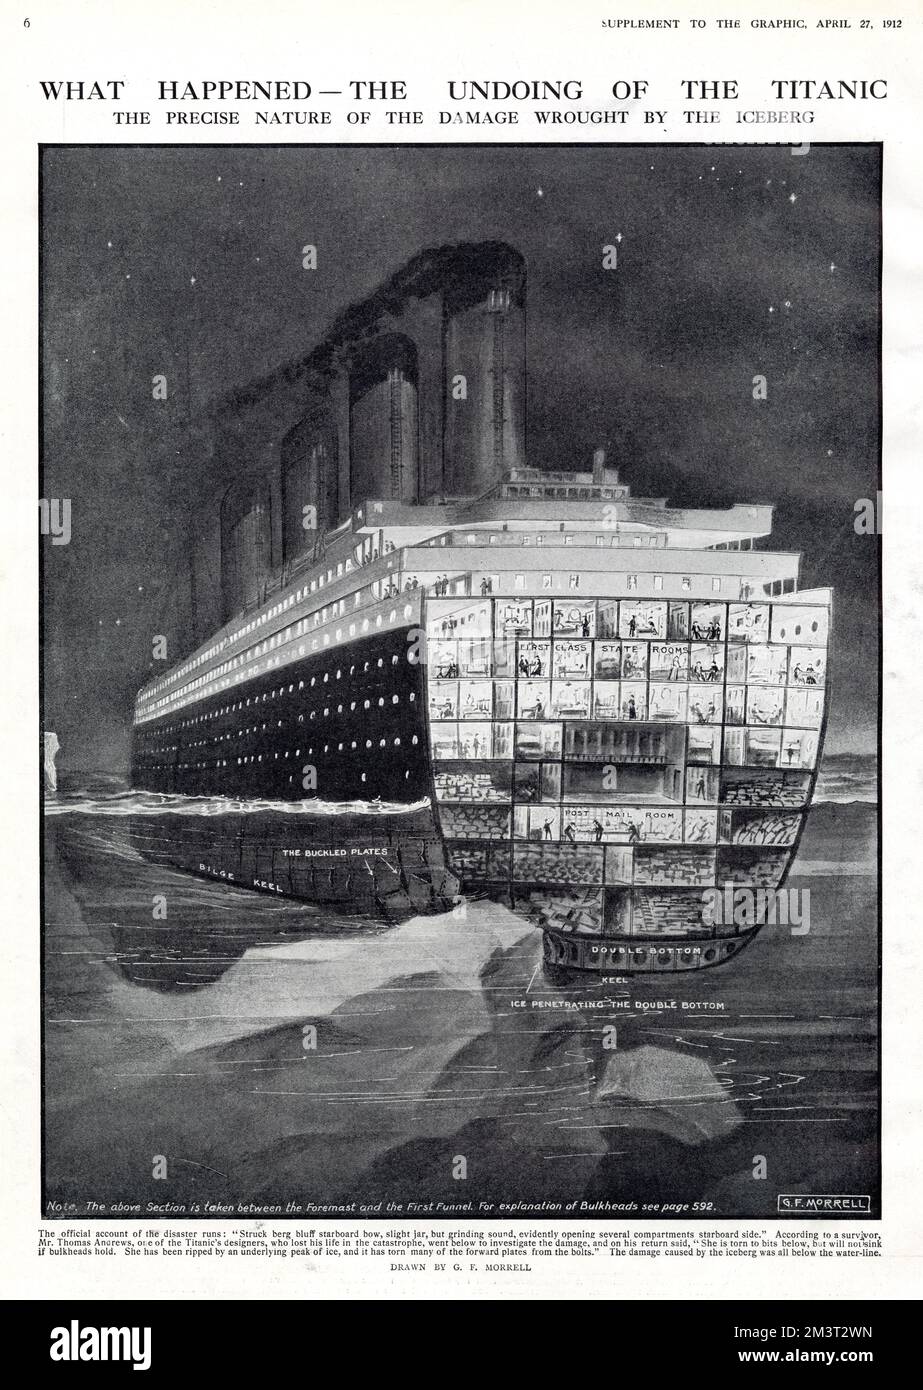 What happened - the undoing of the Titanic. The precise nature of the damage wrought by the iceberg. According to a survivor, Mr Thomas Andrews, one of the Titanic's designers, who lost his life, went below to investigate the damage, and on his return said 'She is torn to bits below, but will not sink if bulkheads hold. She has been ripped by an underlying peak of ice, and it has torn many of the forward plates from the bolts.' The damage caused by the iceberg was all below the water-line as can be seen in this cross-sectional drawing. Stock Photo